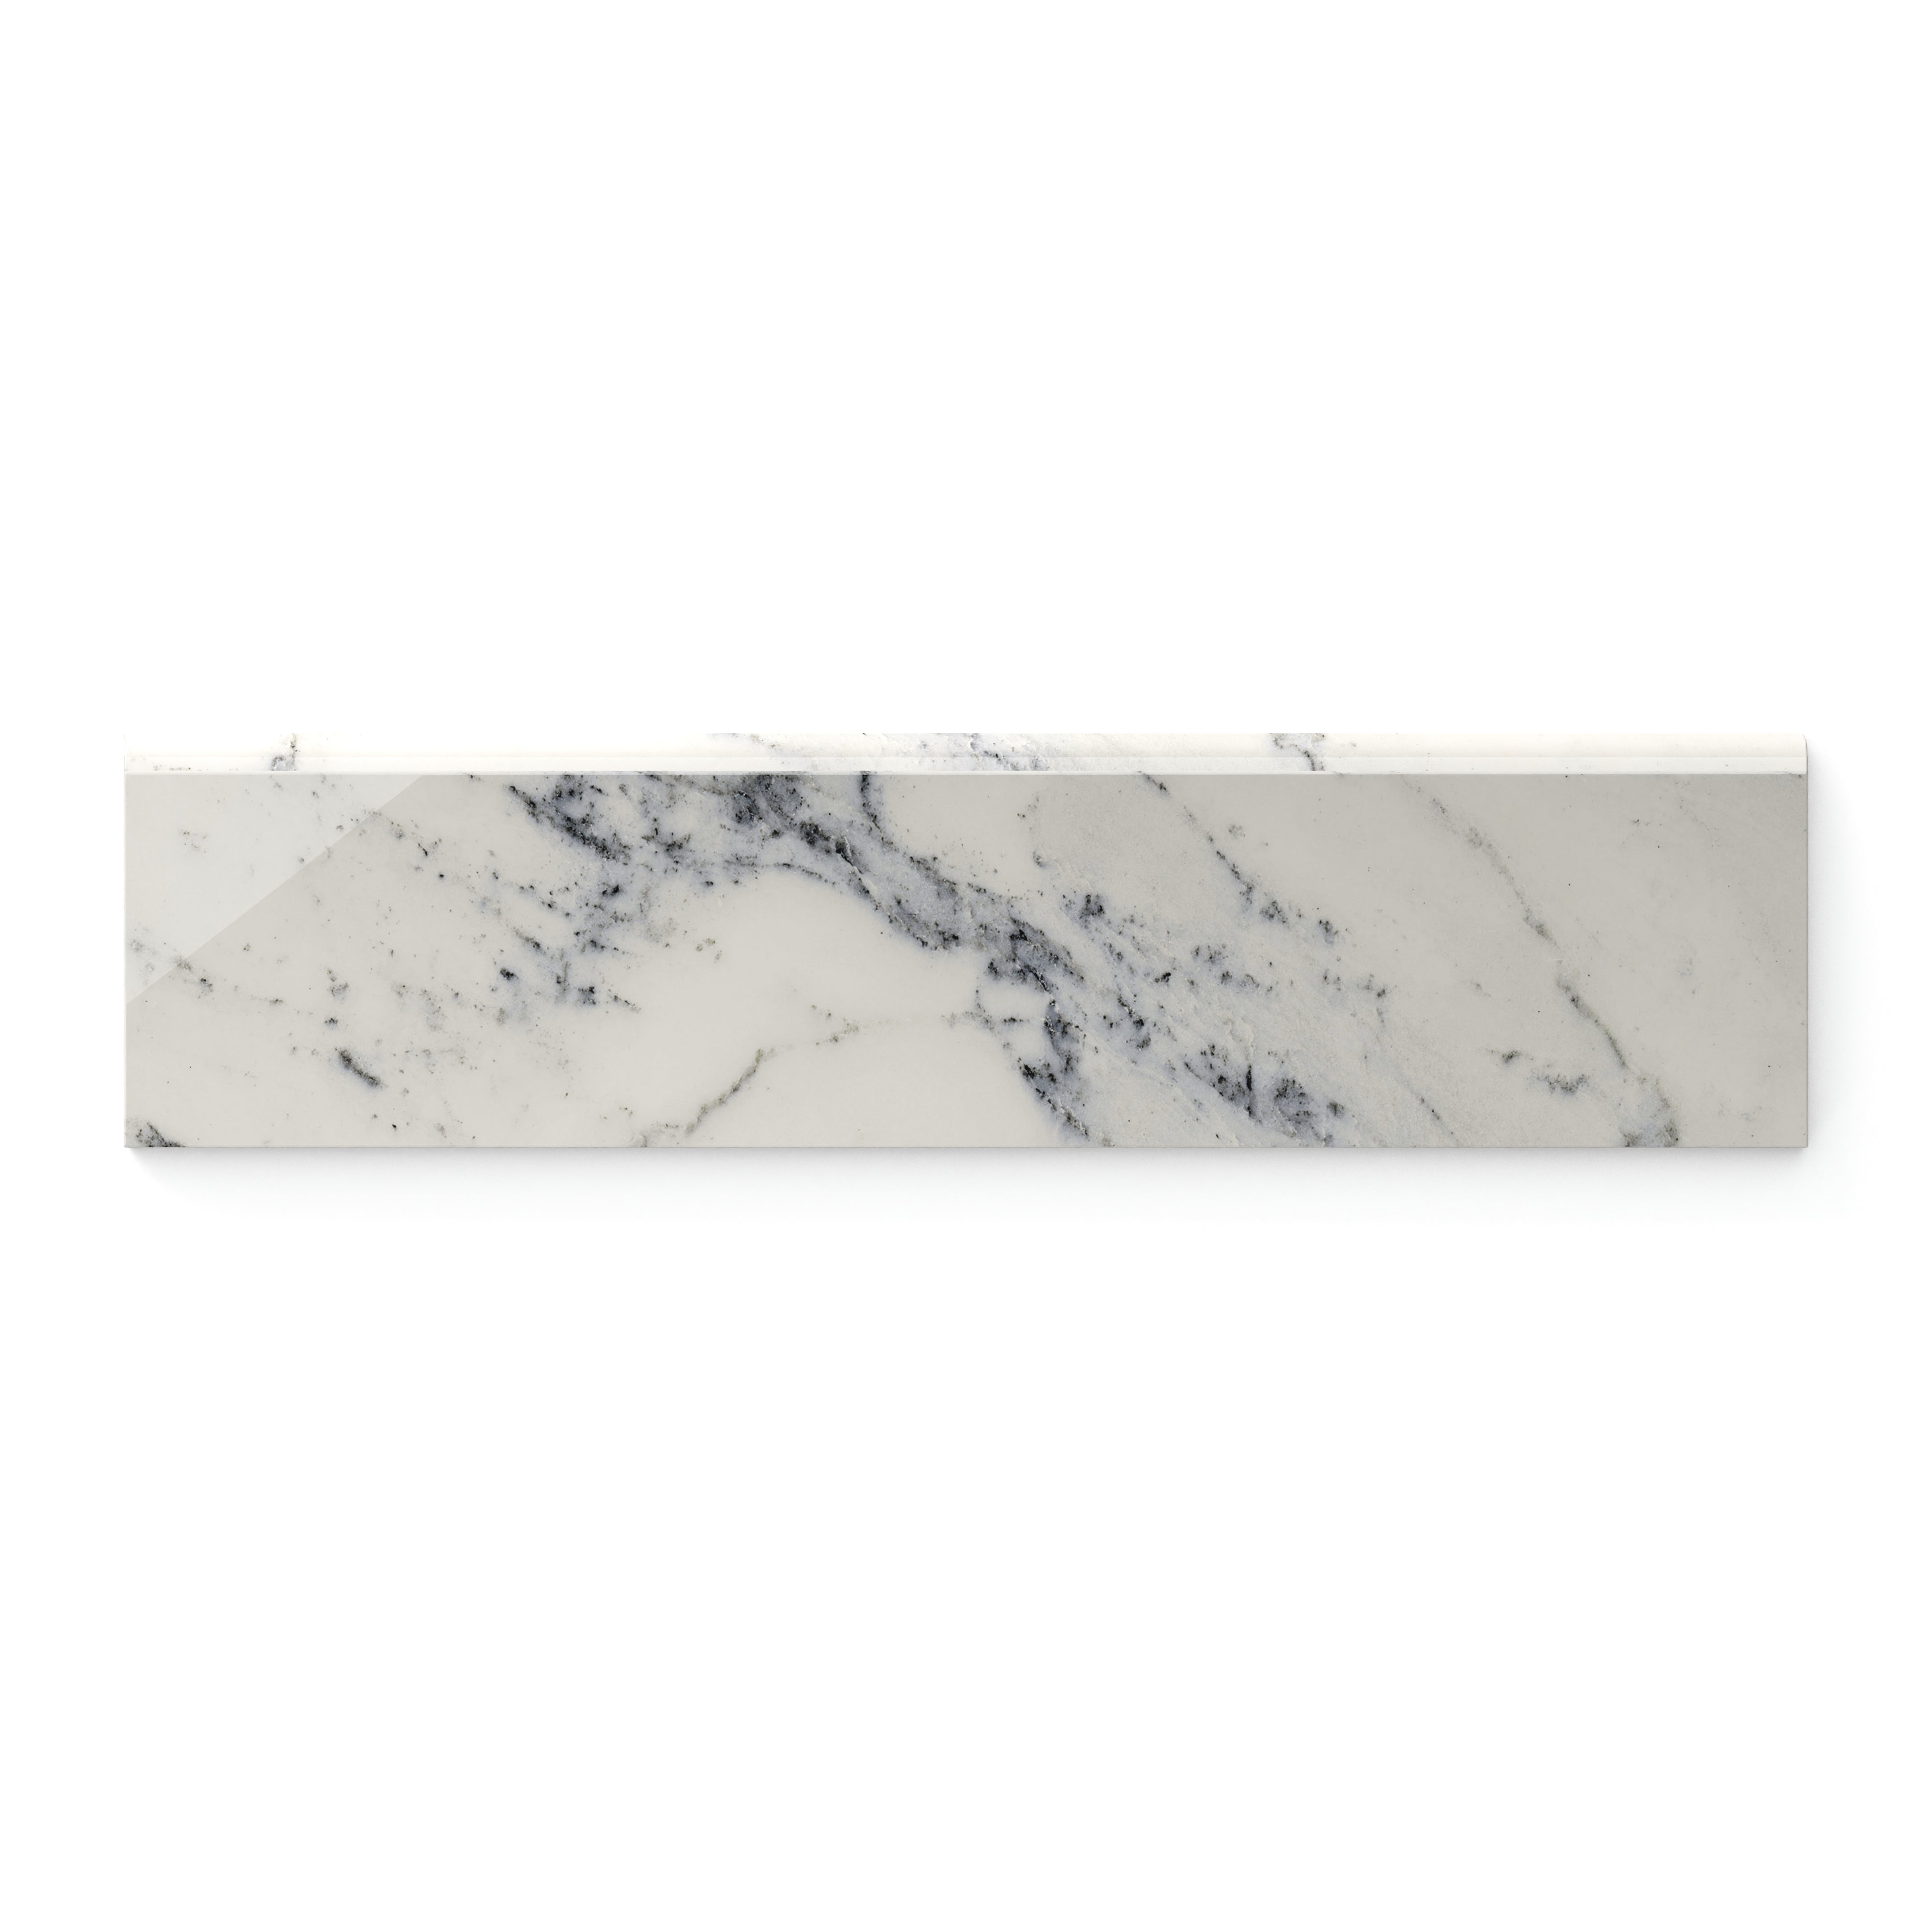 Aniston 3x12 Polished Porcelain Bullnose Tile in Calacatta Antico